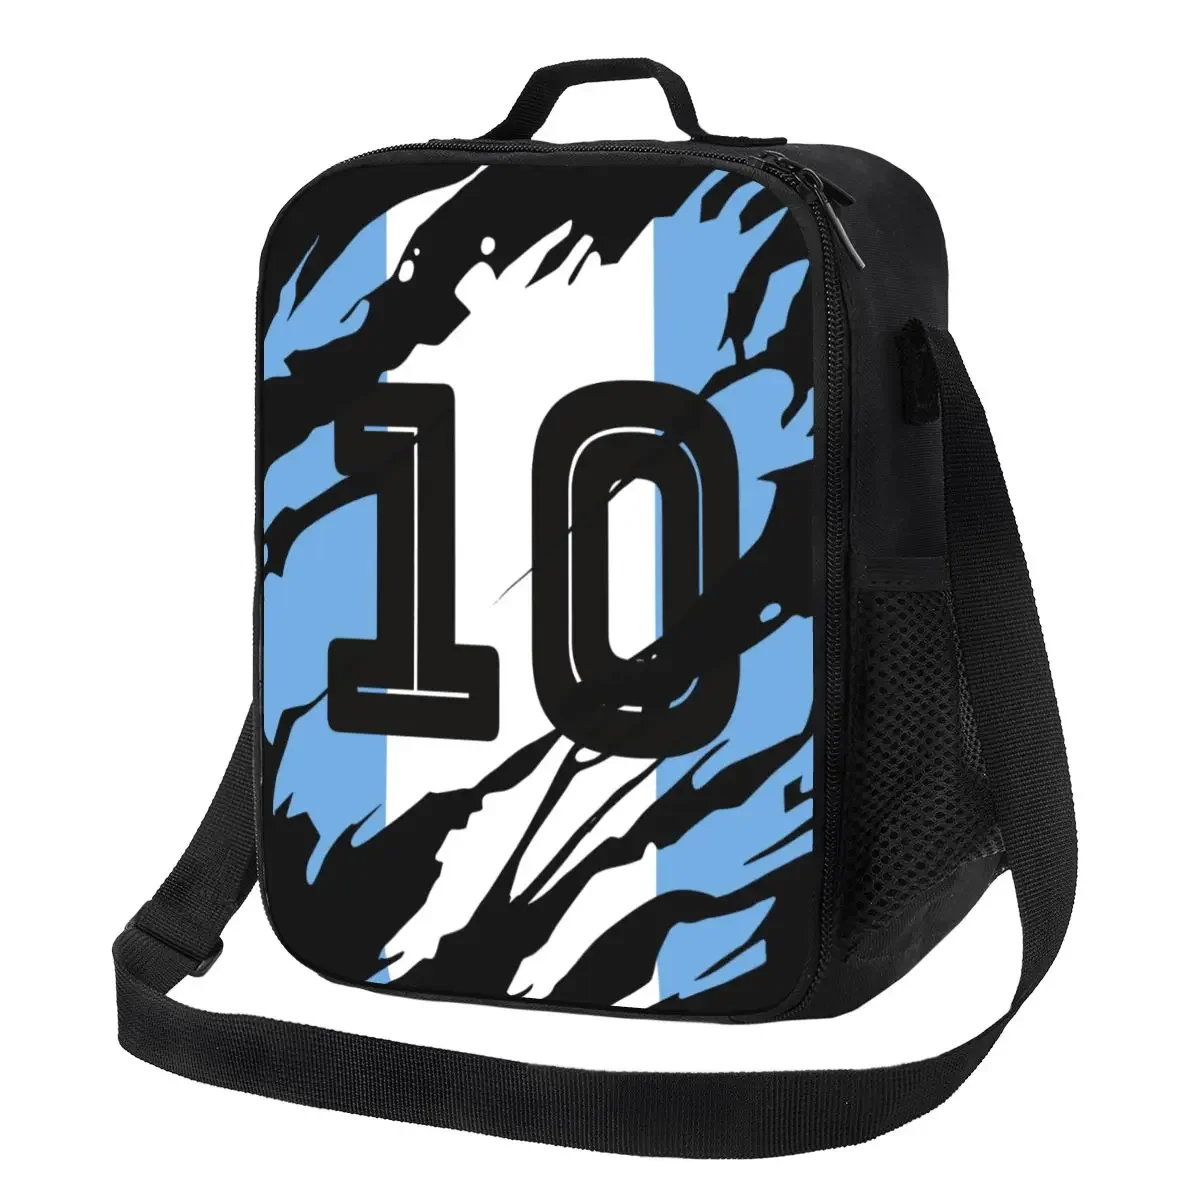 

Argentina Soccer Legend Maradona Thermal Insulated Lunch Bag Portable Lunch Container for Outdoor Camping Travel Bento Food Box